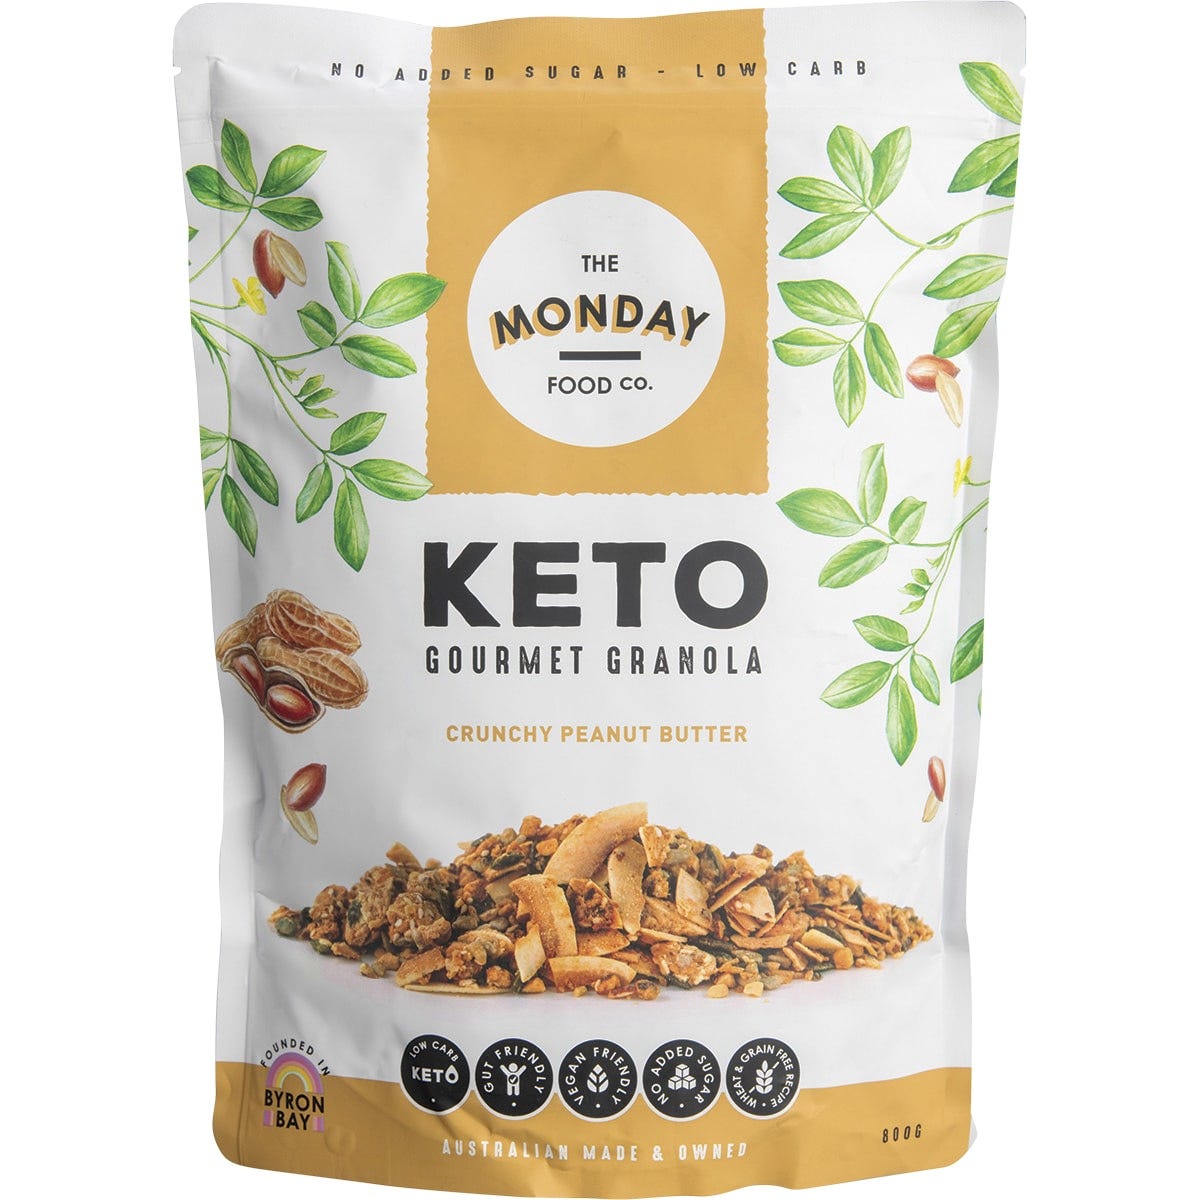 The Monday Food Co. Keto Gourmet Granola Crunchy Peanut Butter 800g - Dr Earth - Breakfast